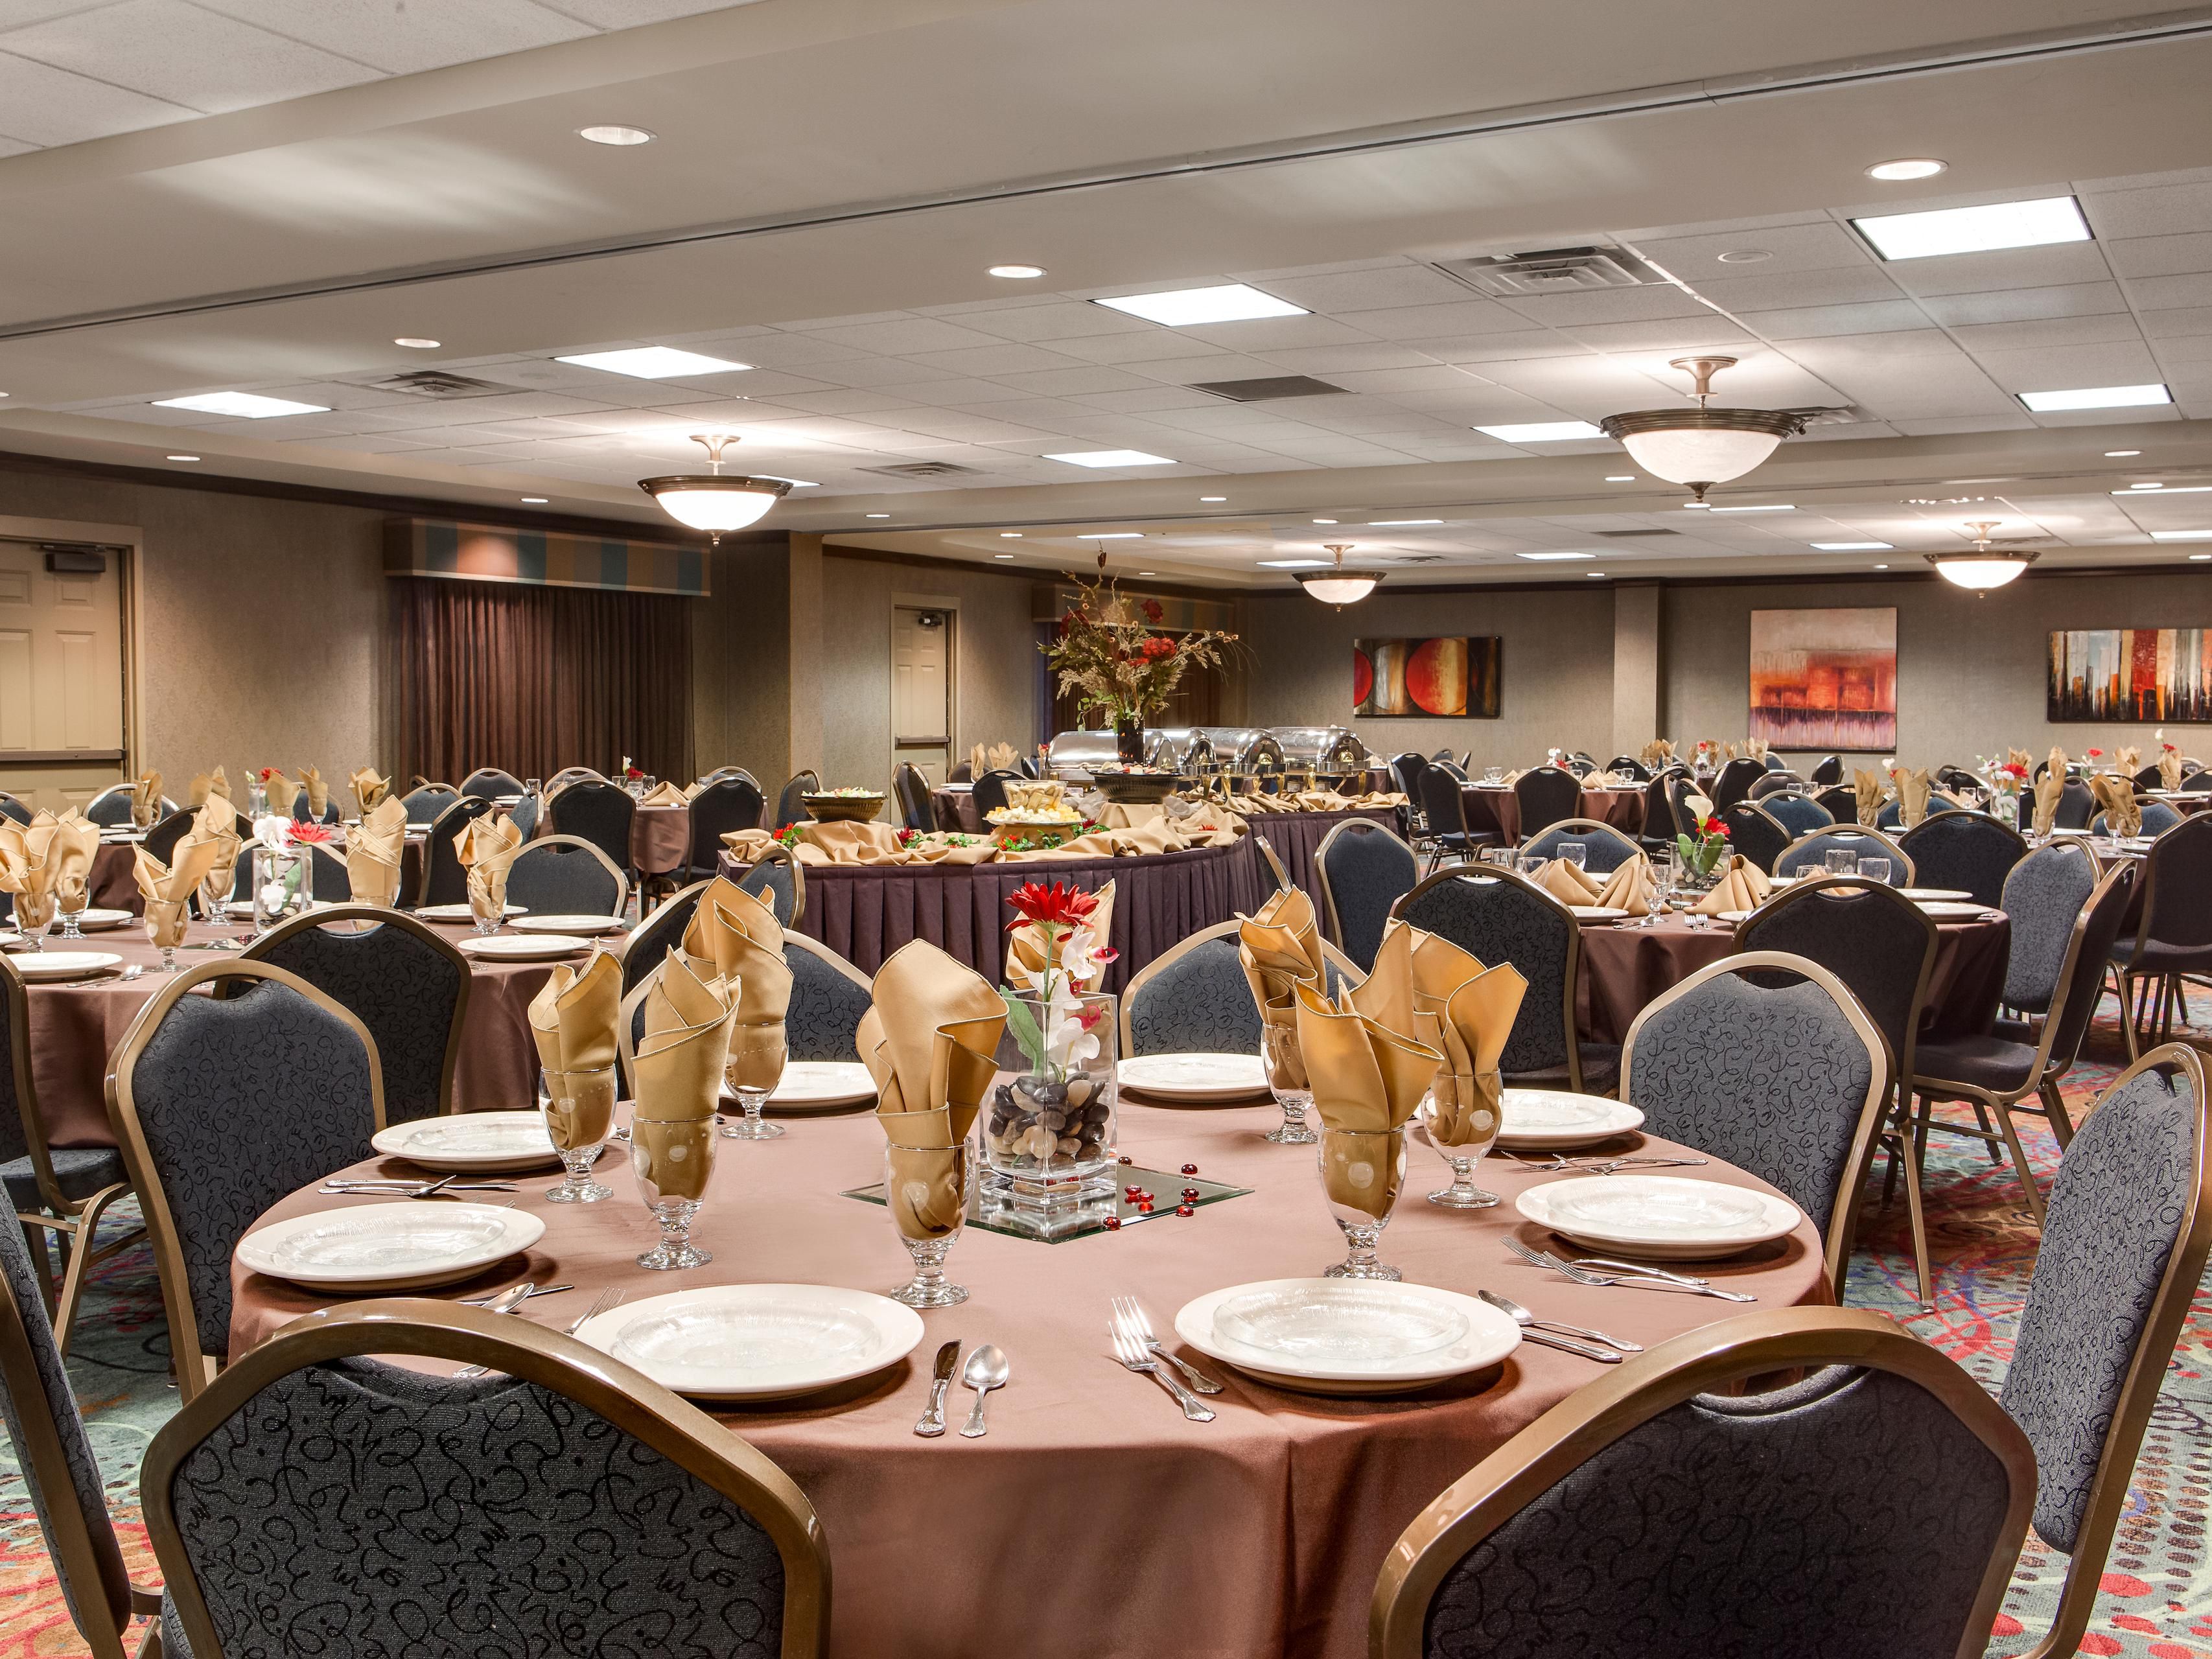 With over 7 meeting rooms and 6,030 sq. ft. of event space, we can seat up to 190 guests for a wedding or 140 guests for a classroom style meeting. Our event space can be beautifully transformed to meet the needs of your style and budget. Contact our professional event planners at 712-329-987 for a free custom quote today!